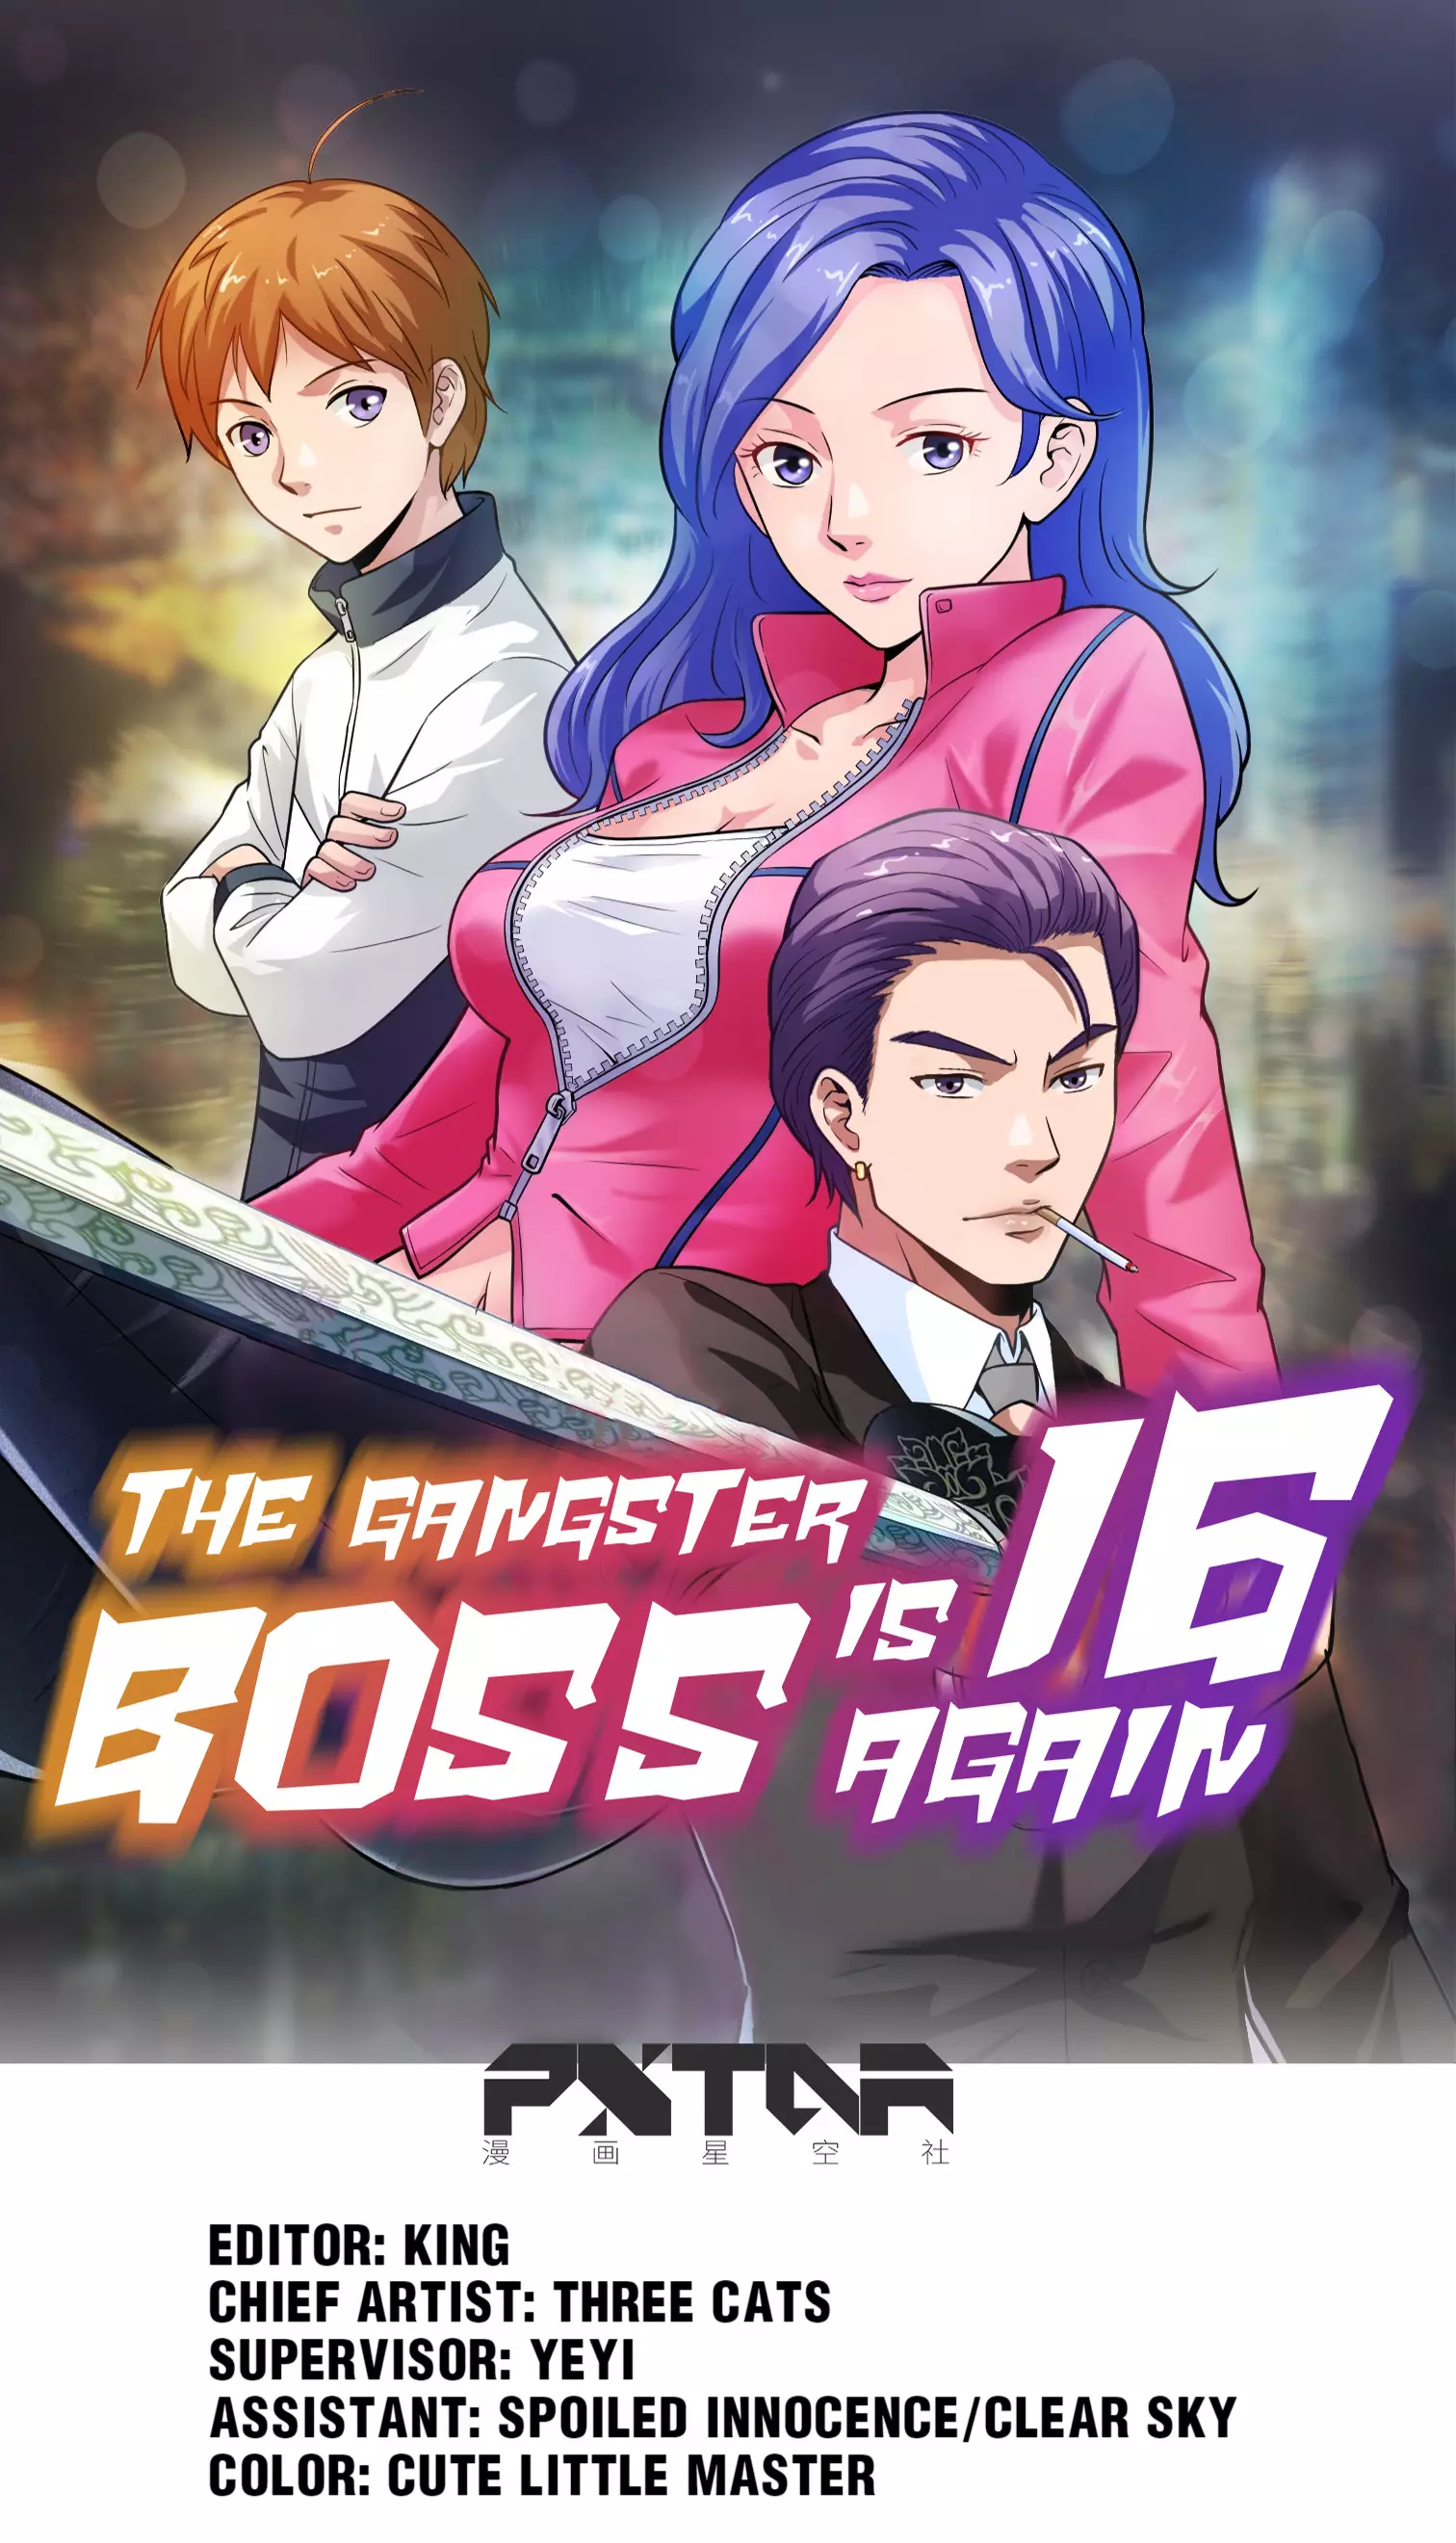 The Gangster Boss Is 16 Again - 53.1 page 1-0232e4ab